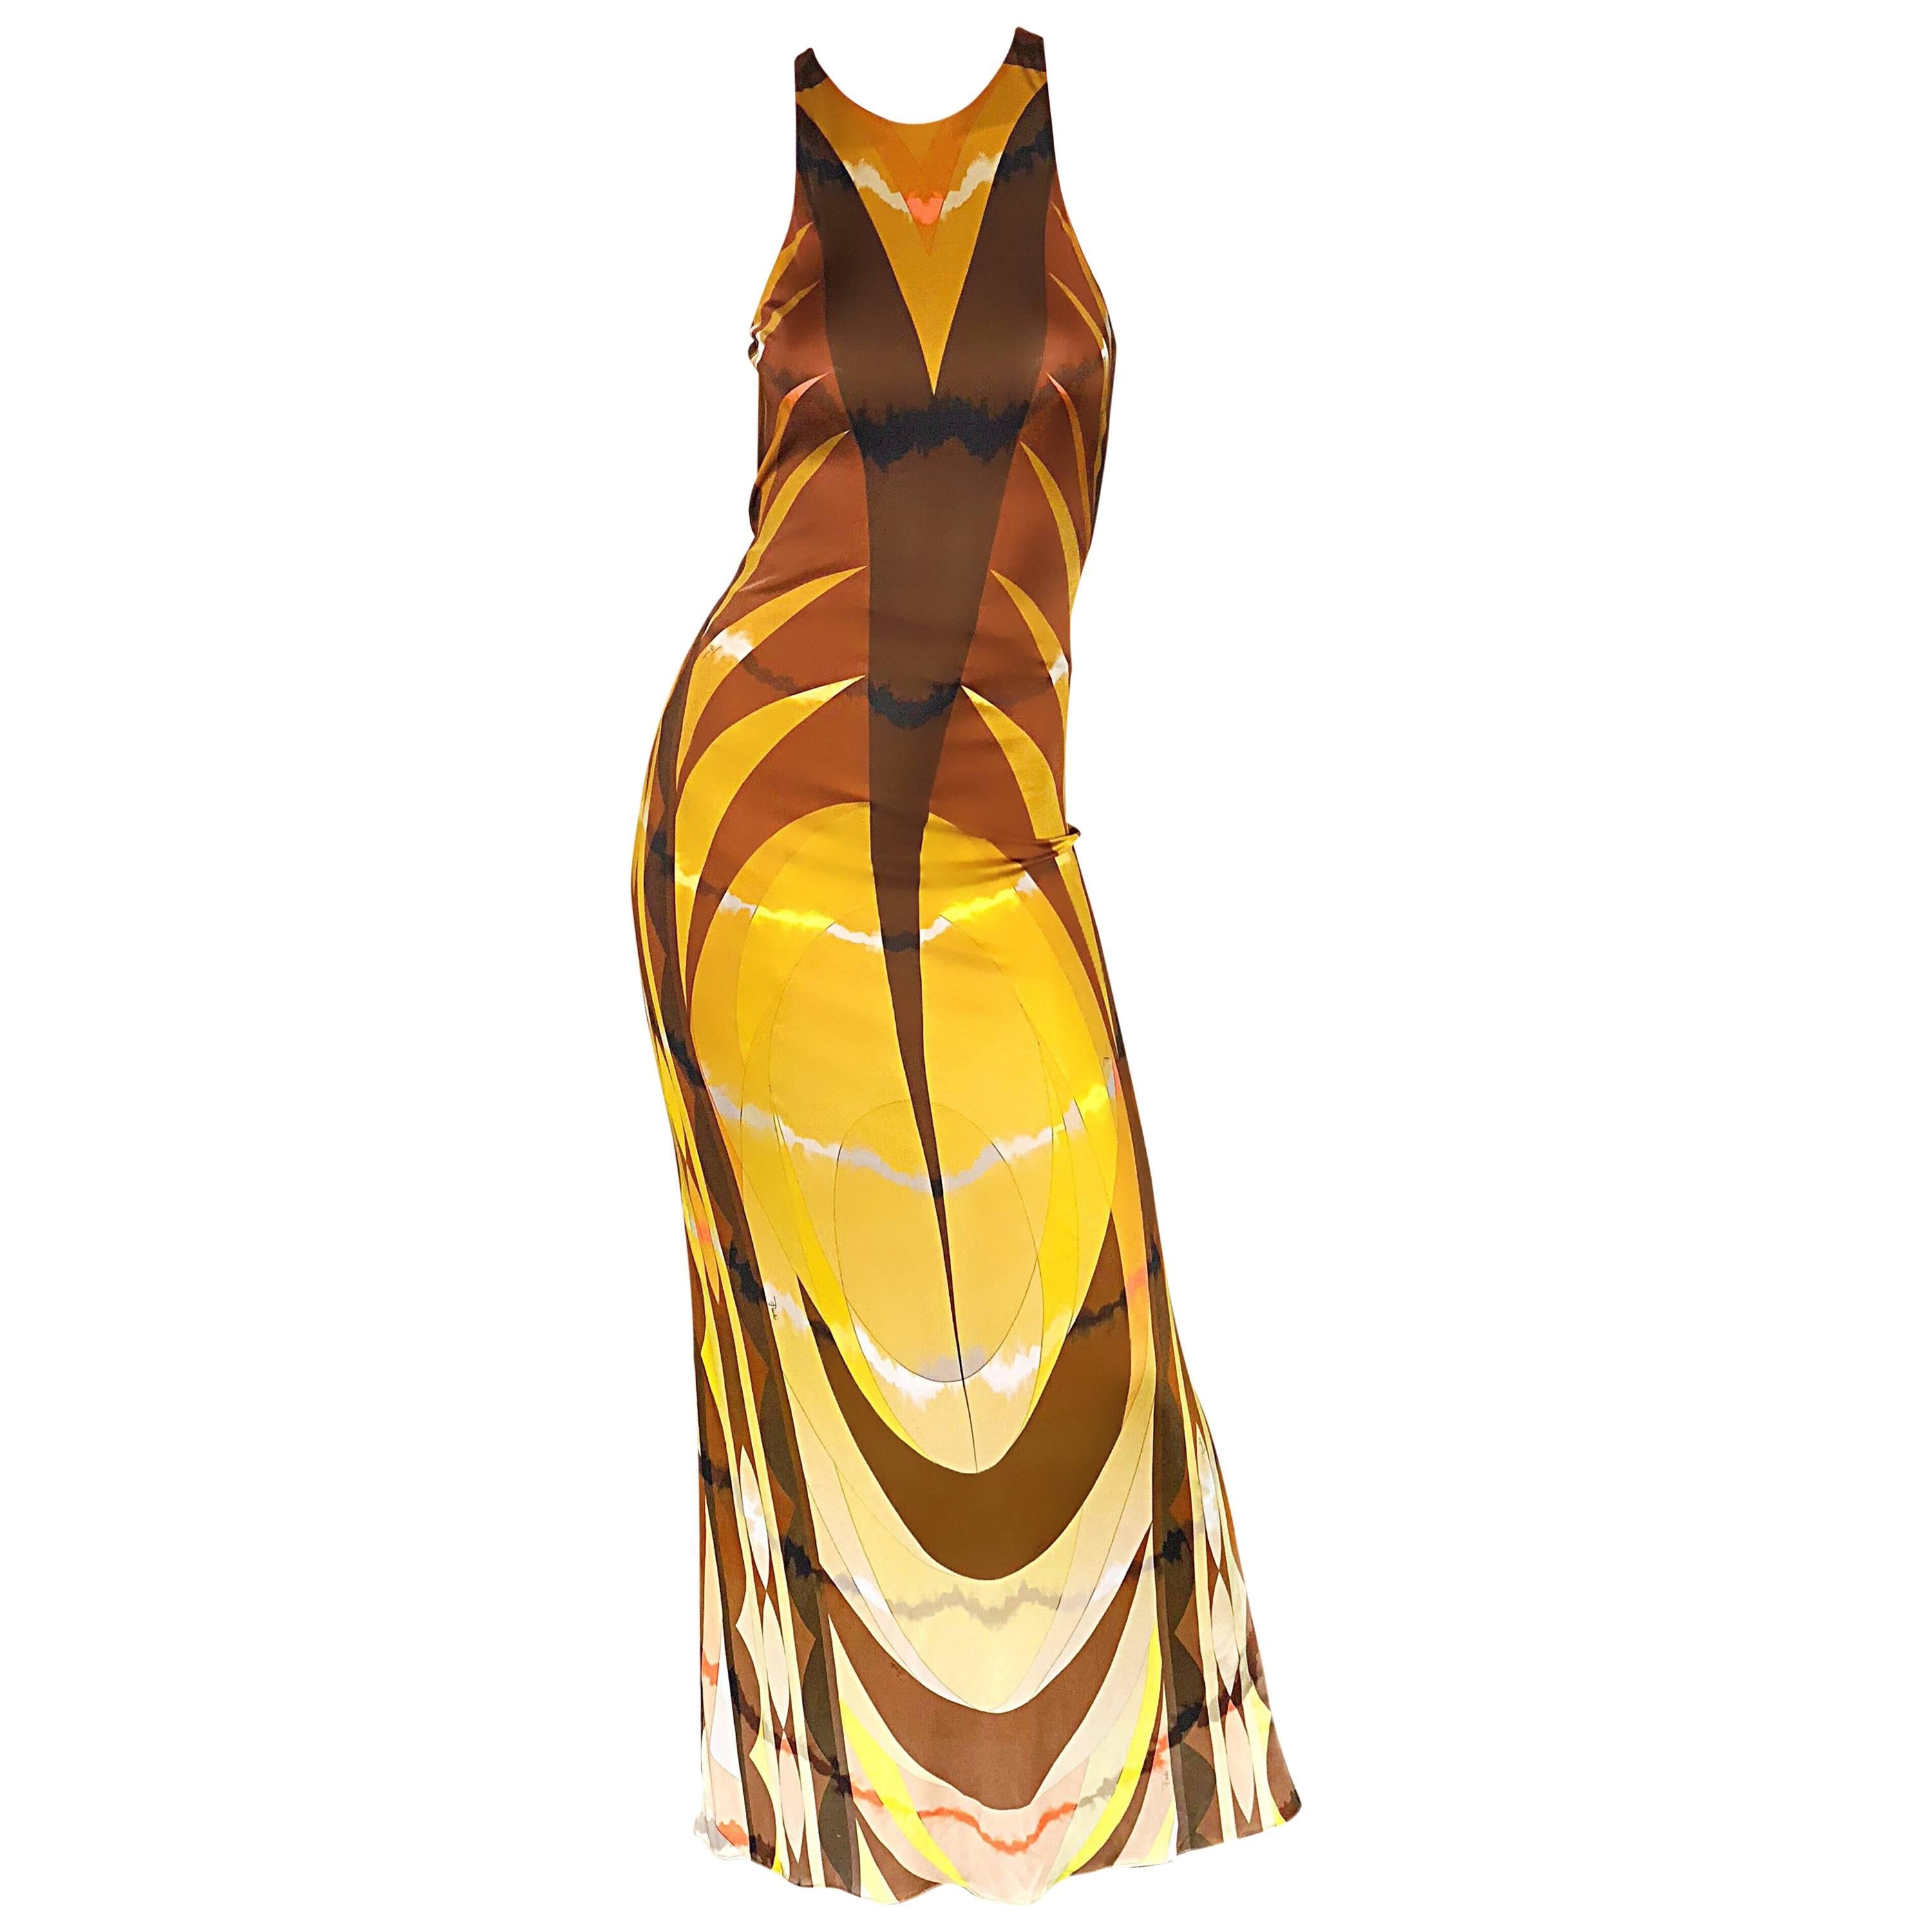 Sexy late 90s EMILIO PUCCI rayon jersey open-back gown! Features warm autumnal tones of brown, mustard yellow, ivory, and pops of pink fuchsia in a slimming abstract print. Soft slinky jersey stretches to fit, and is fully lined. Wonderful tailored